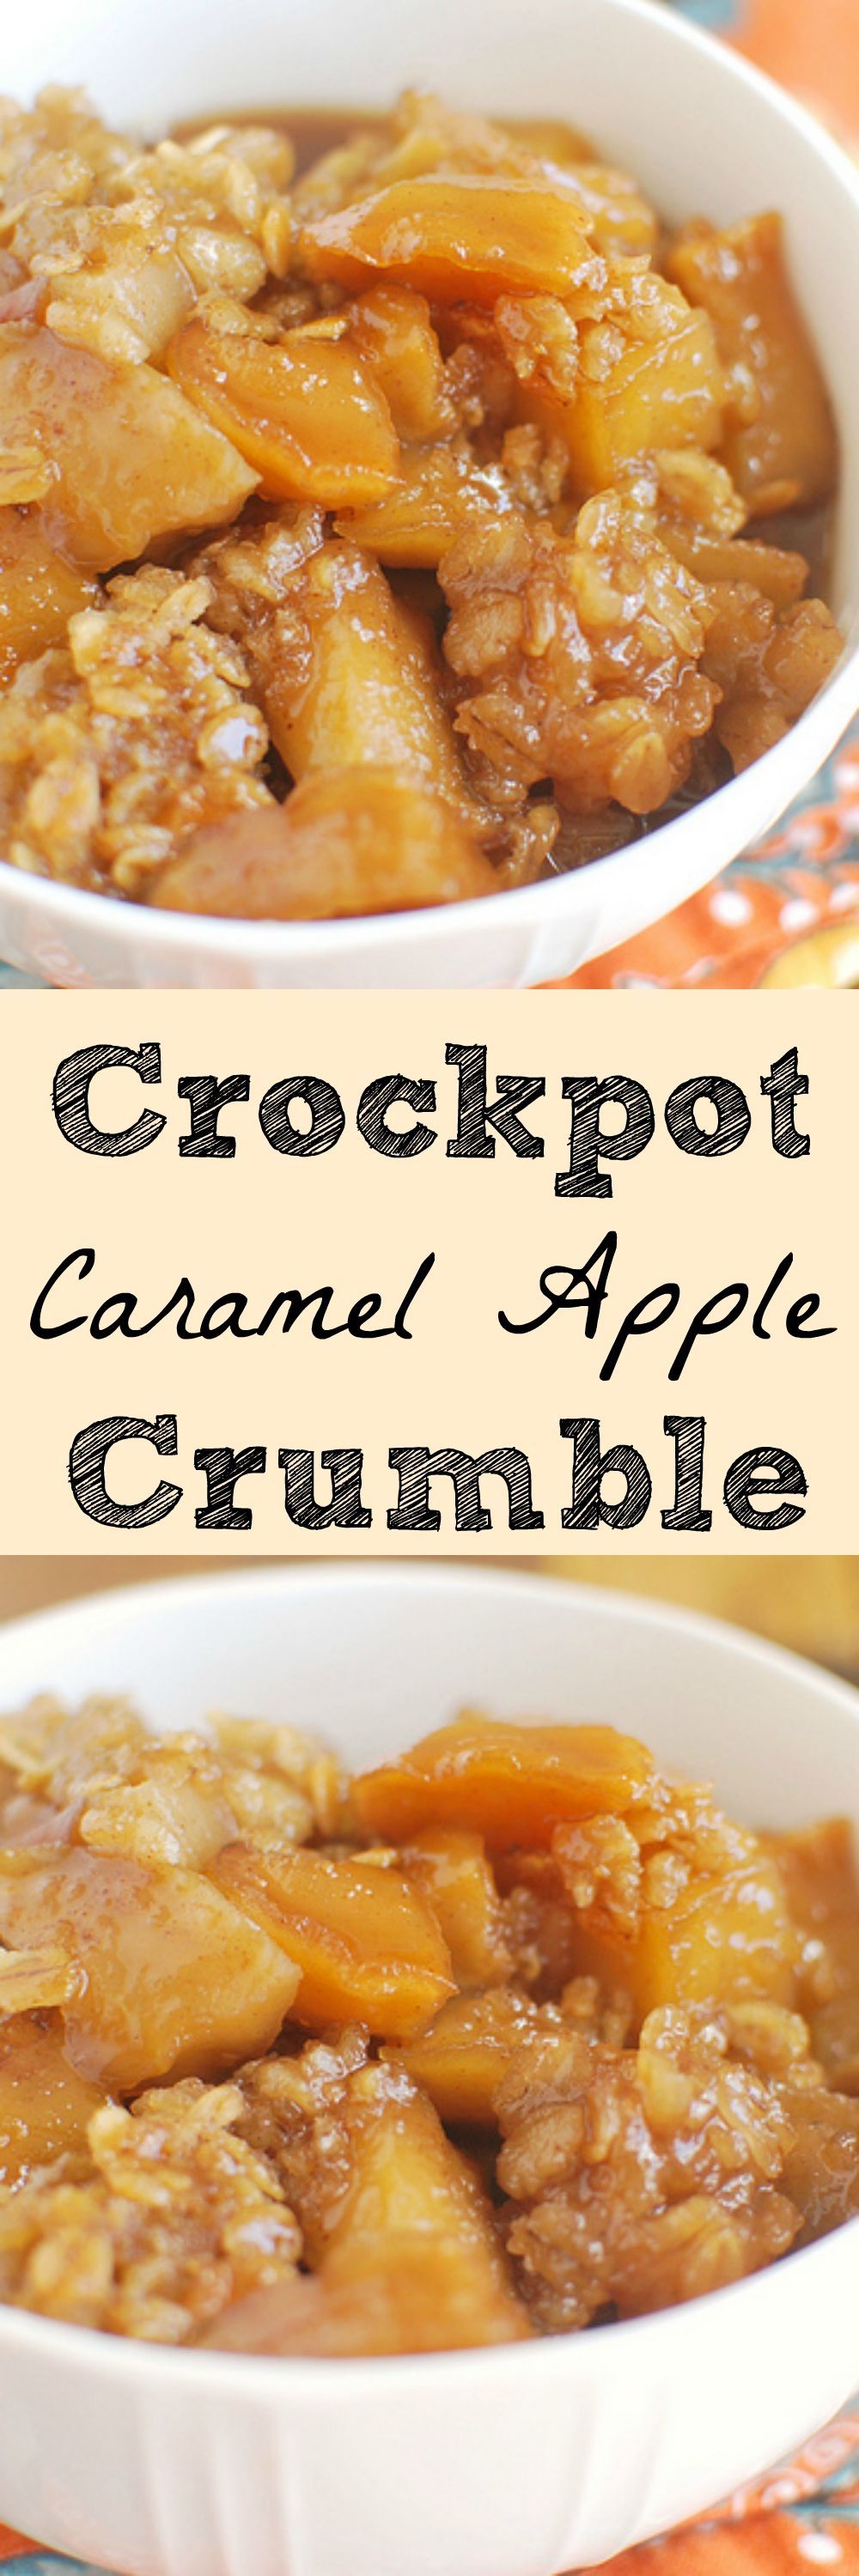 Crockpot Caramel Apple Crumble – the most delicious fall dessert! And its made in the crockpot!